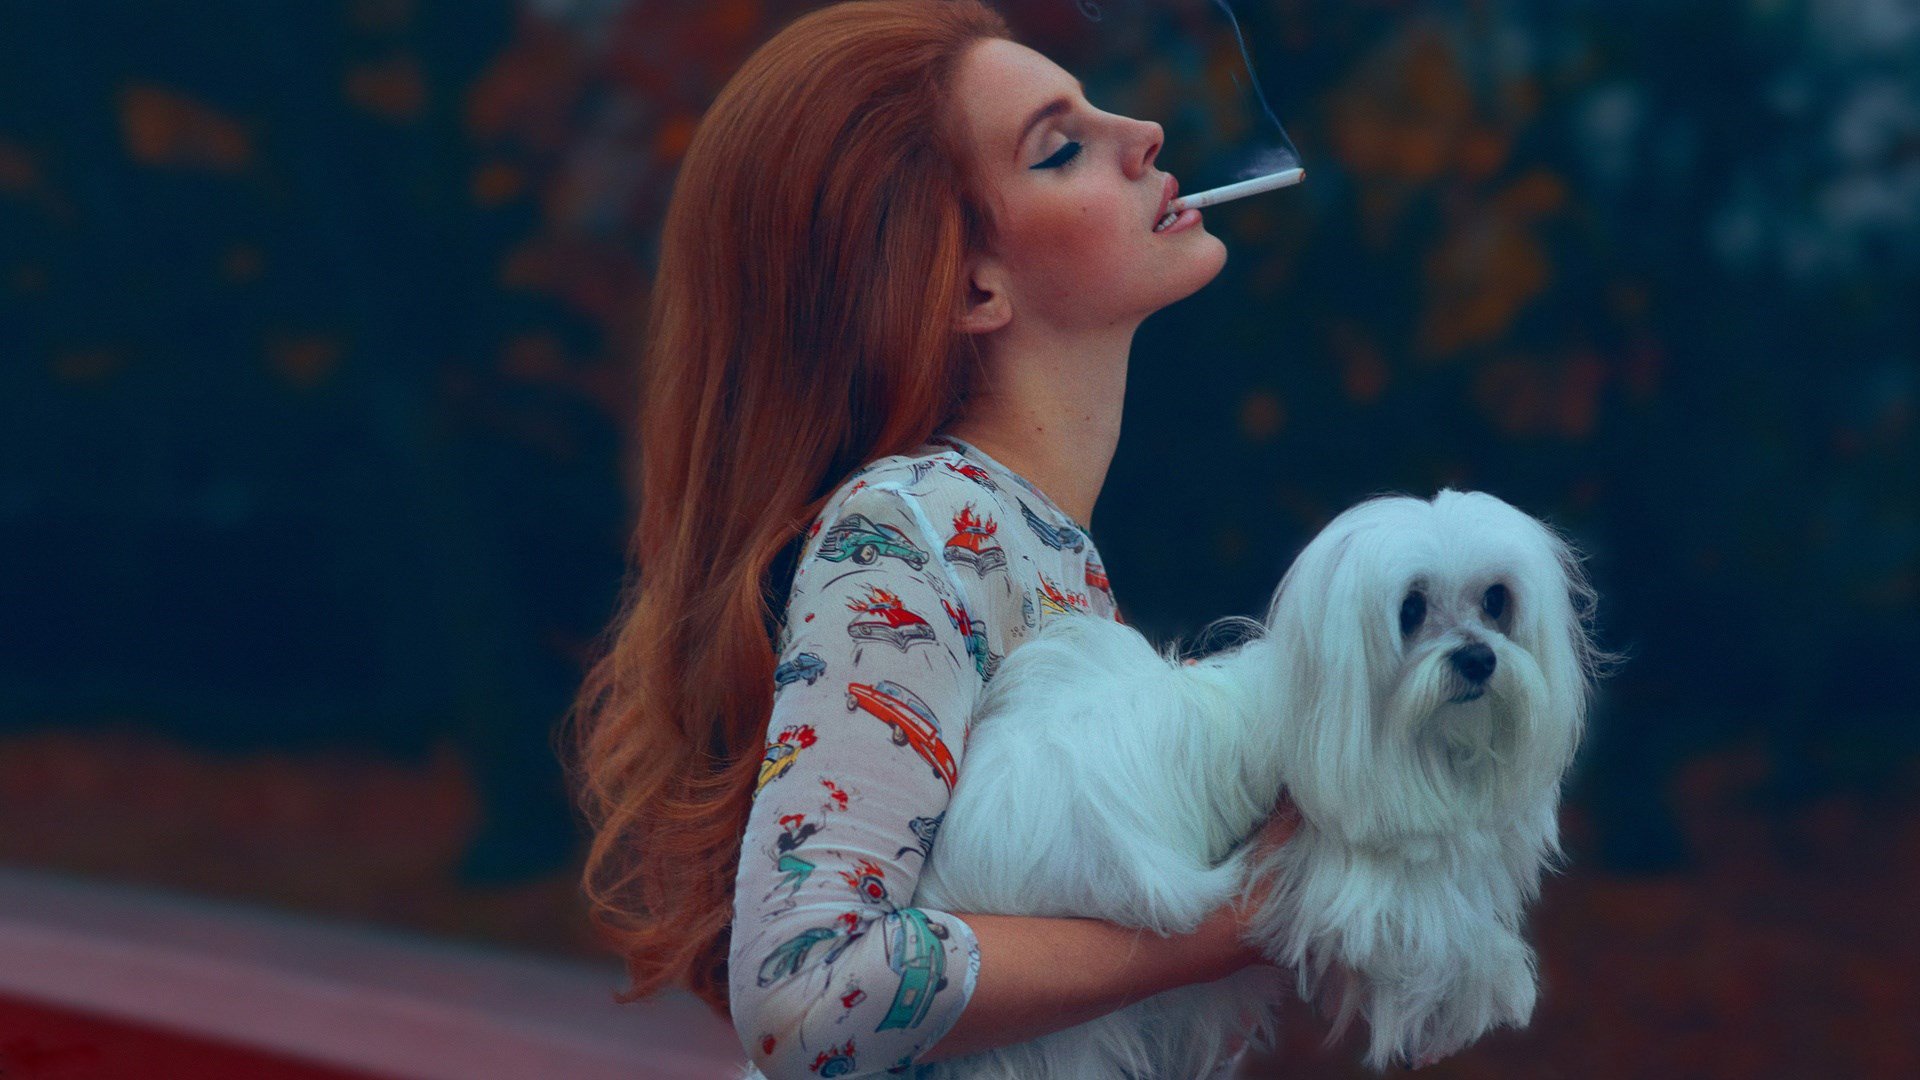 126 Lana Del Rey Hd Wallpapers Background Images Wallpaper Abyss Images, Photos, Reviews